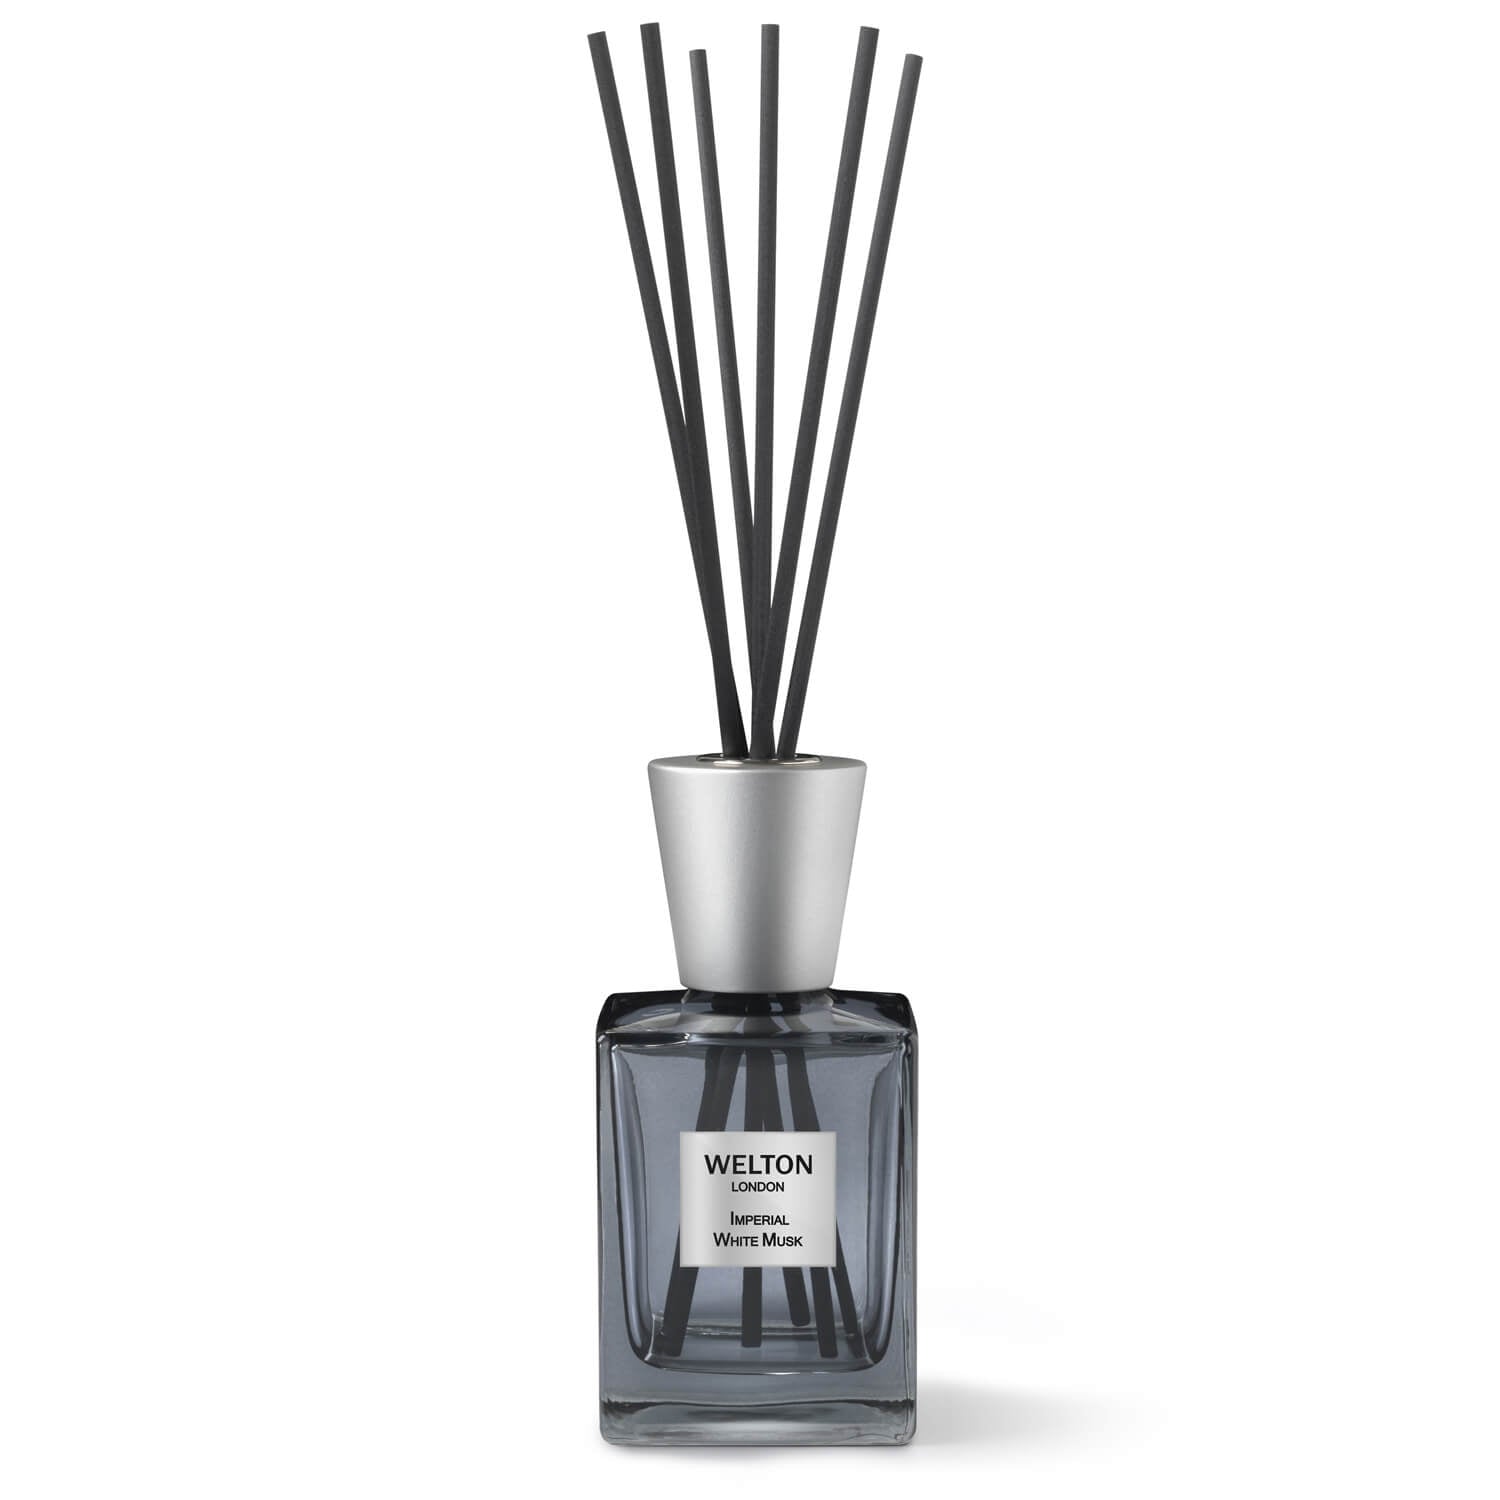 welton london diffuser imperial white musk 500 ml
floral - musky diffusers 